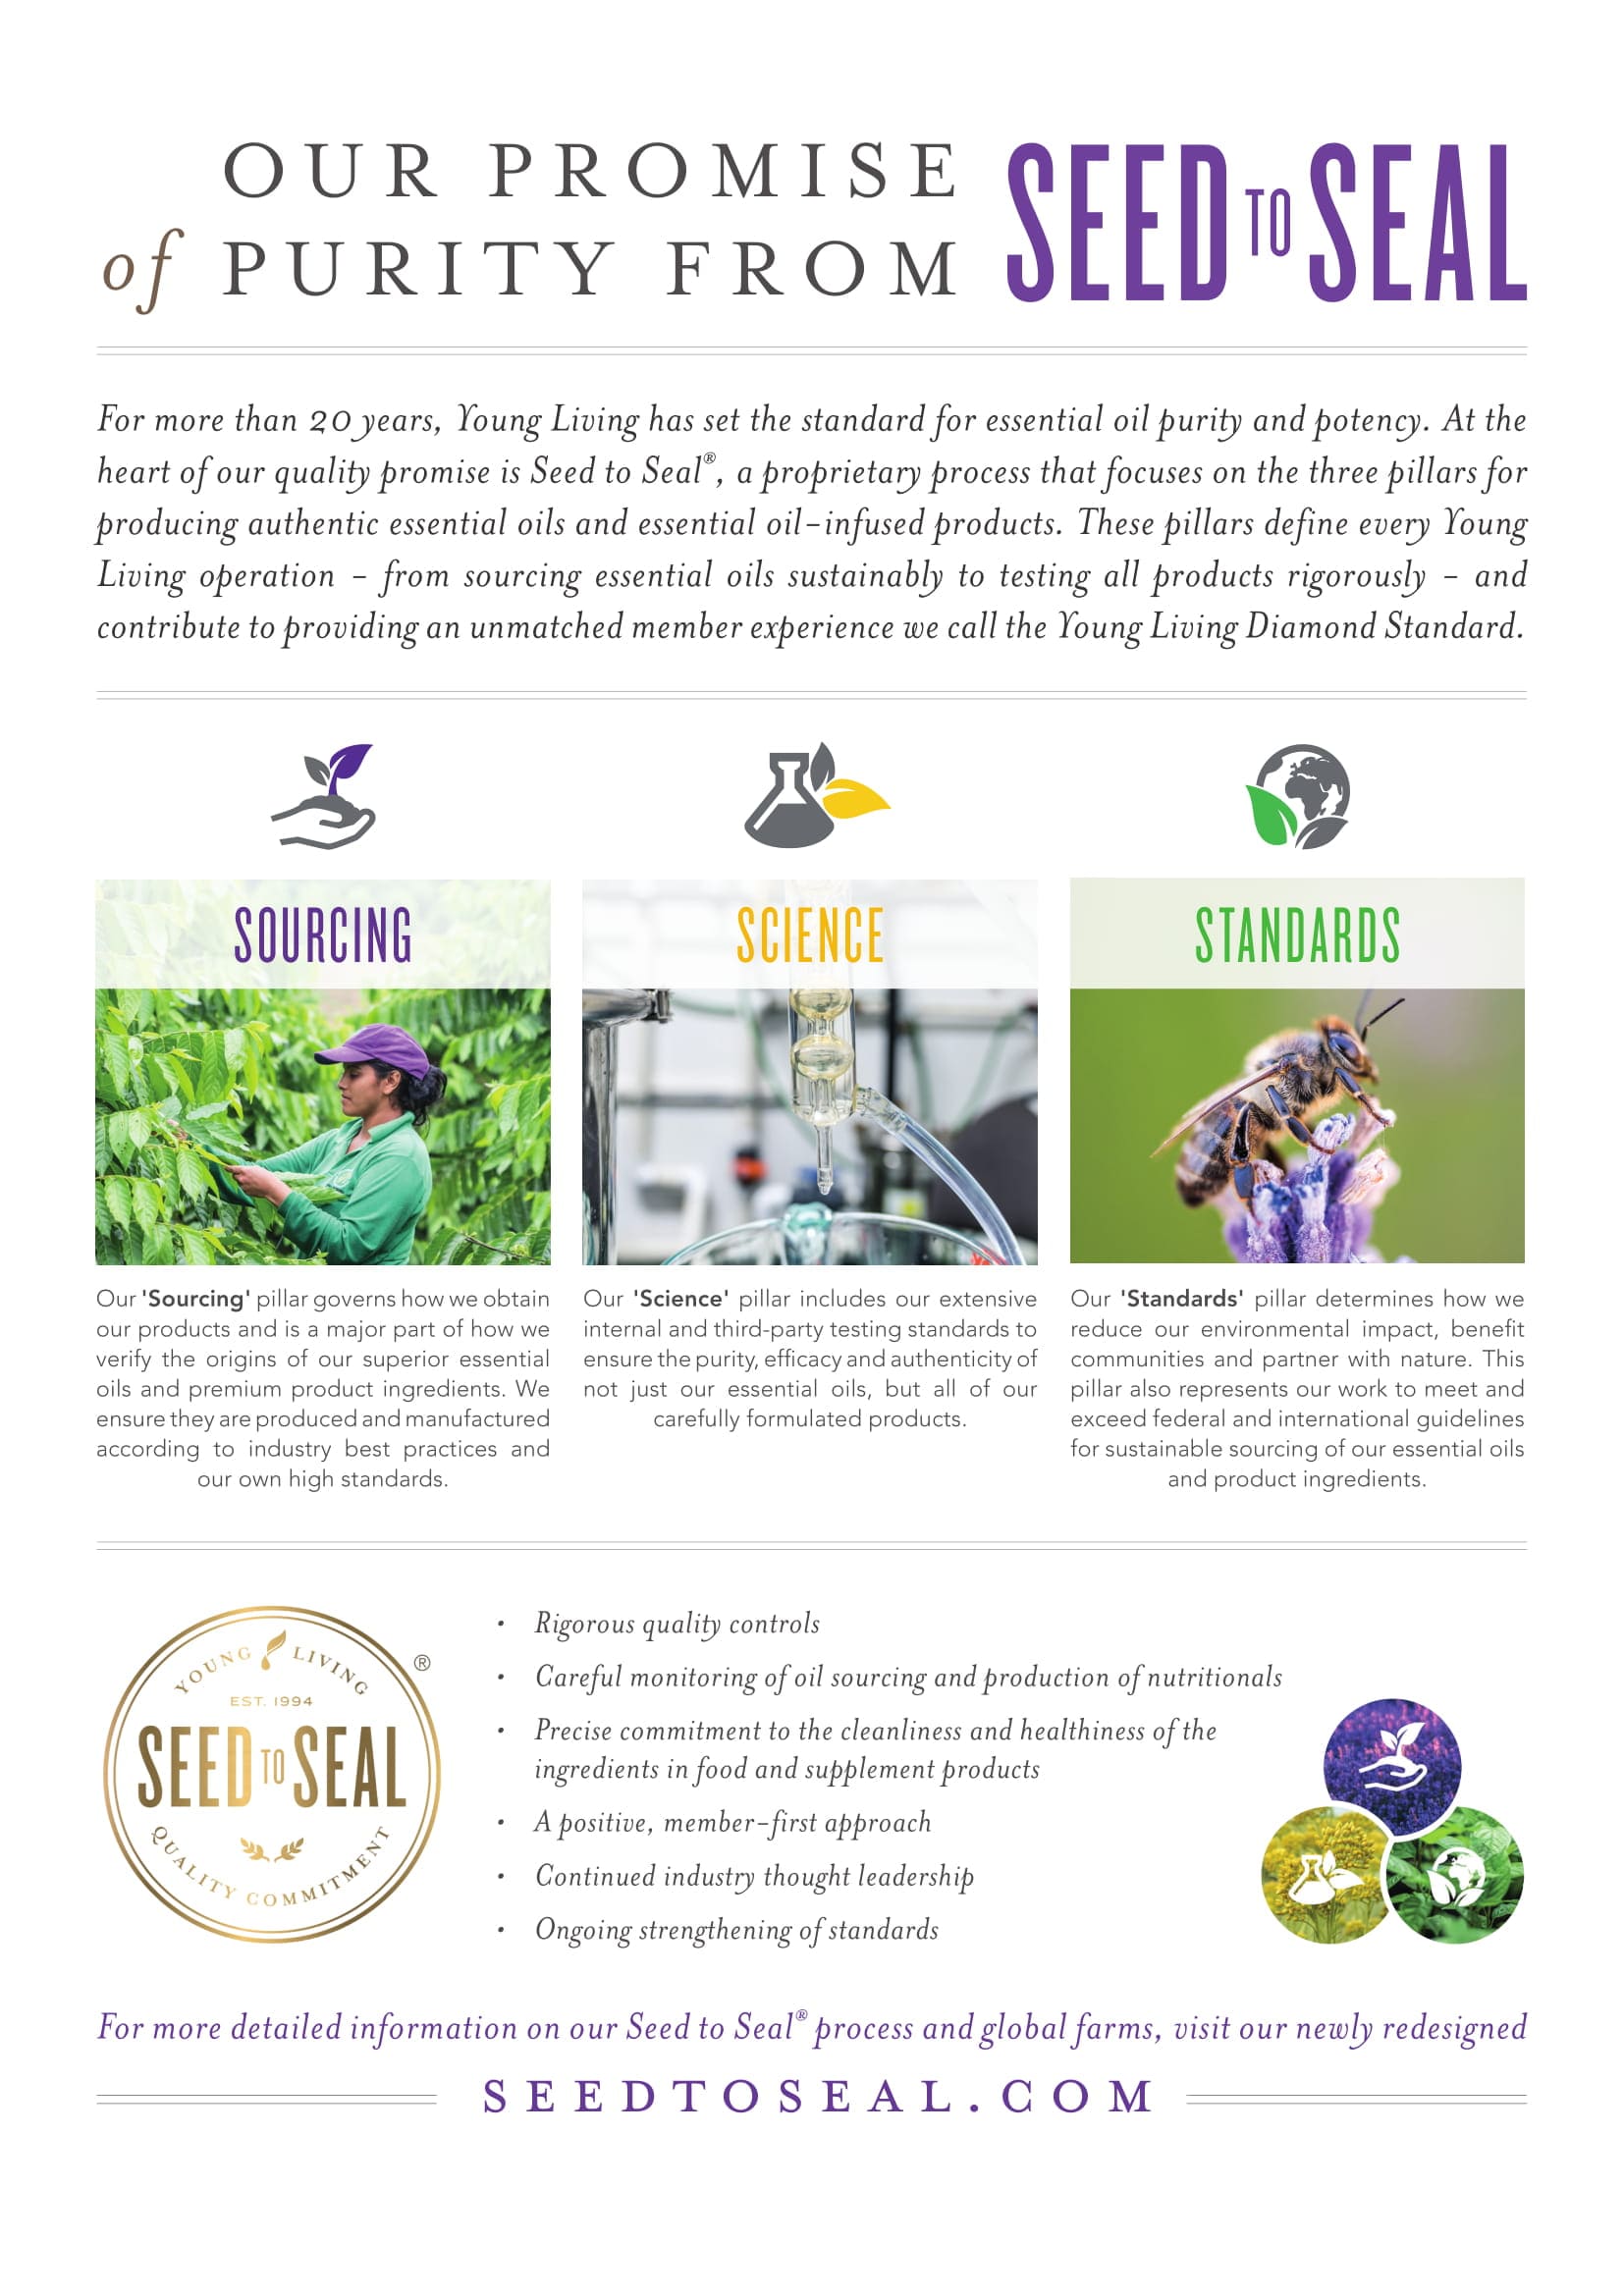 Info Graphic: Young Living Seed to Seal Promise